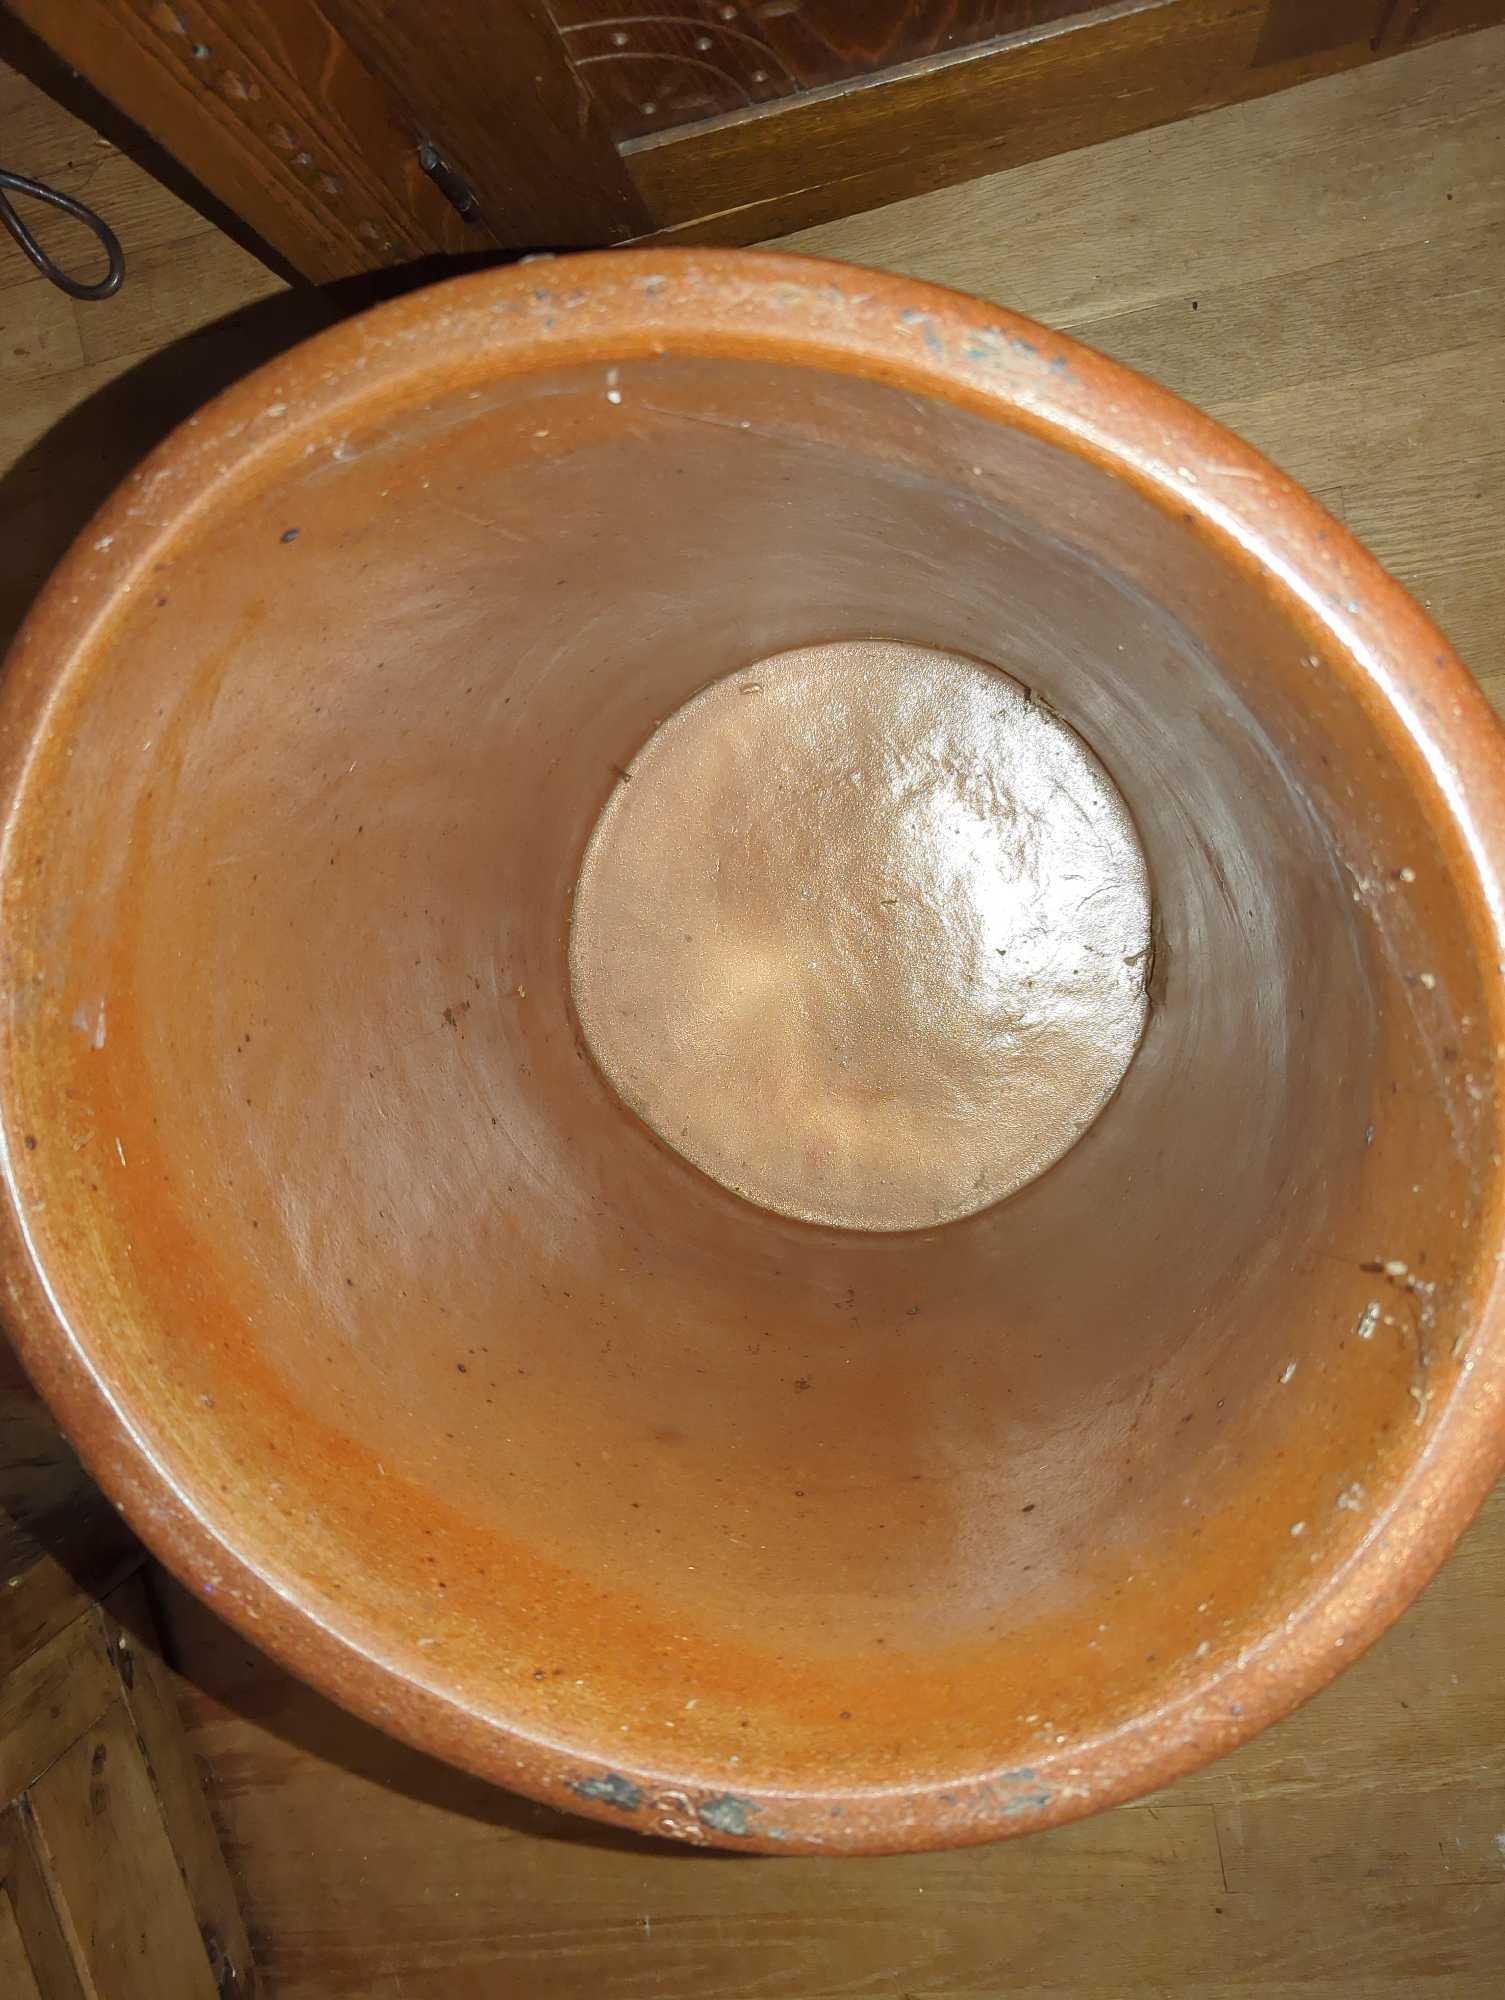 (DR) 19TH CENTURY STYLE PENNSYLVANIA STONEWARE CROCK, DIMENSIONS - 20" H X 17" W X 16" D, WHAT YOU